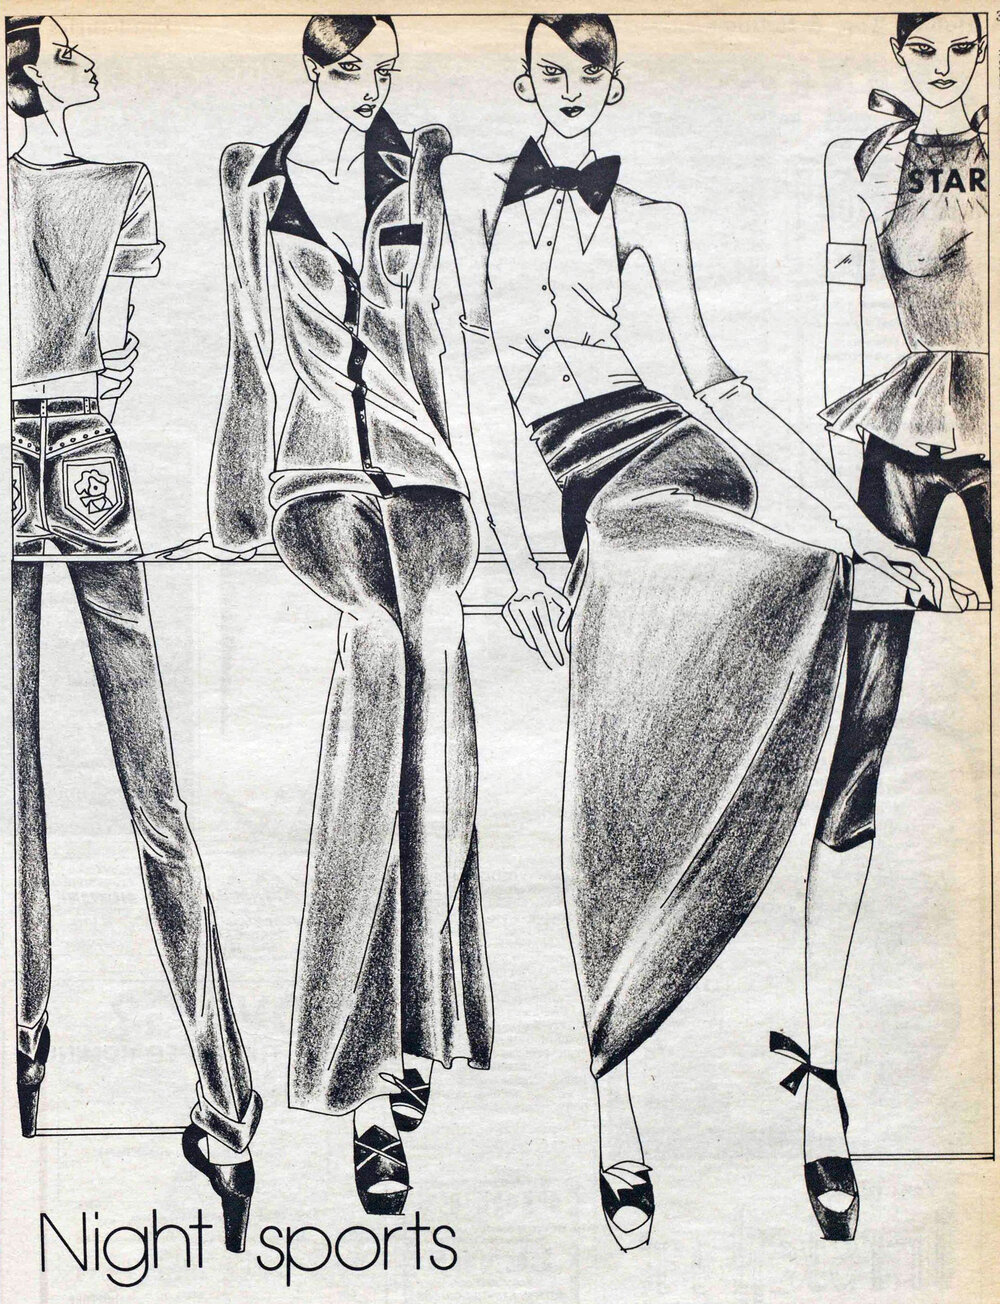 Third from left, Tere Tereba for Tootique. Women’s Wear Daily, August 15, 1973.